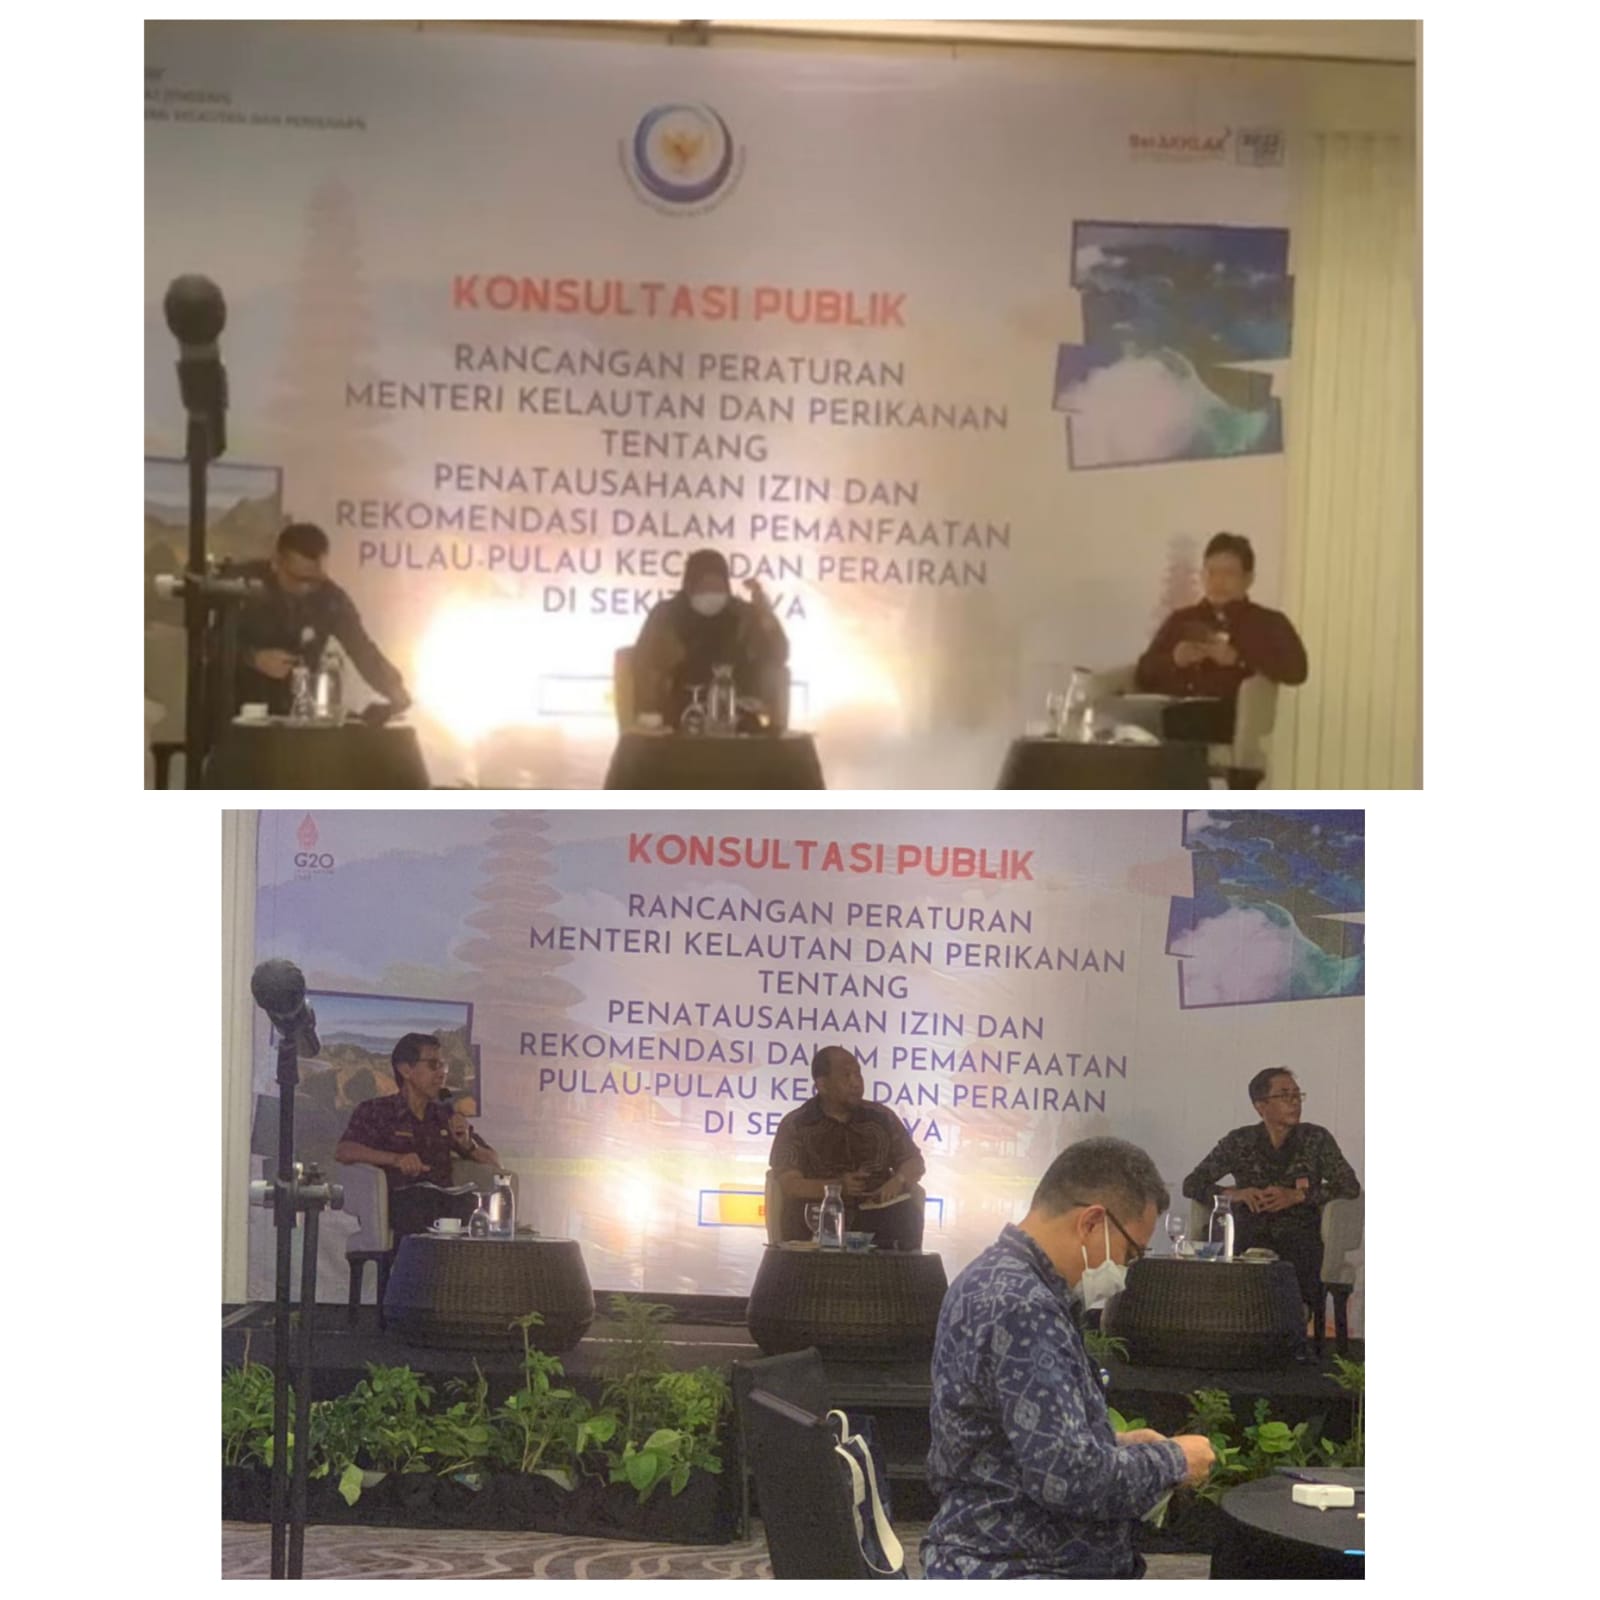 Academics from the Faculty of Law UNUD Attend a Public Consultation by the Secretariat General of the Ministry of Maritime Affairs and Fisheries of the Republic of Indonesia